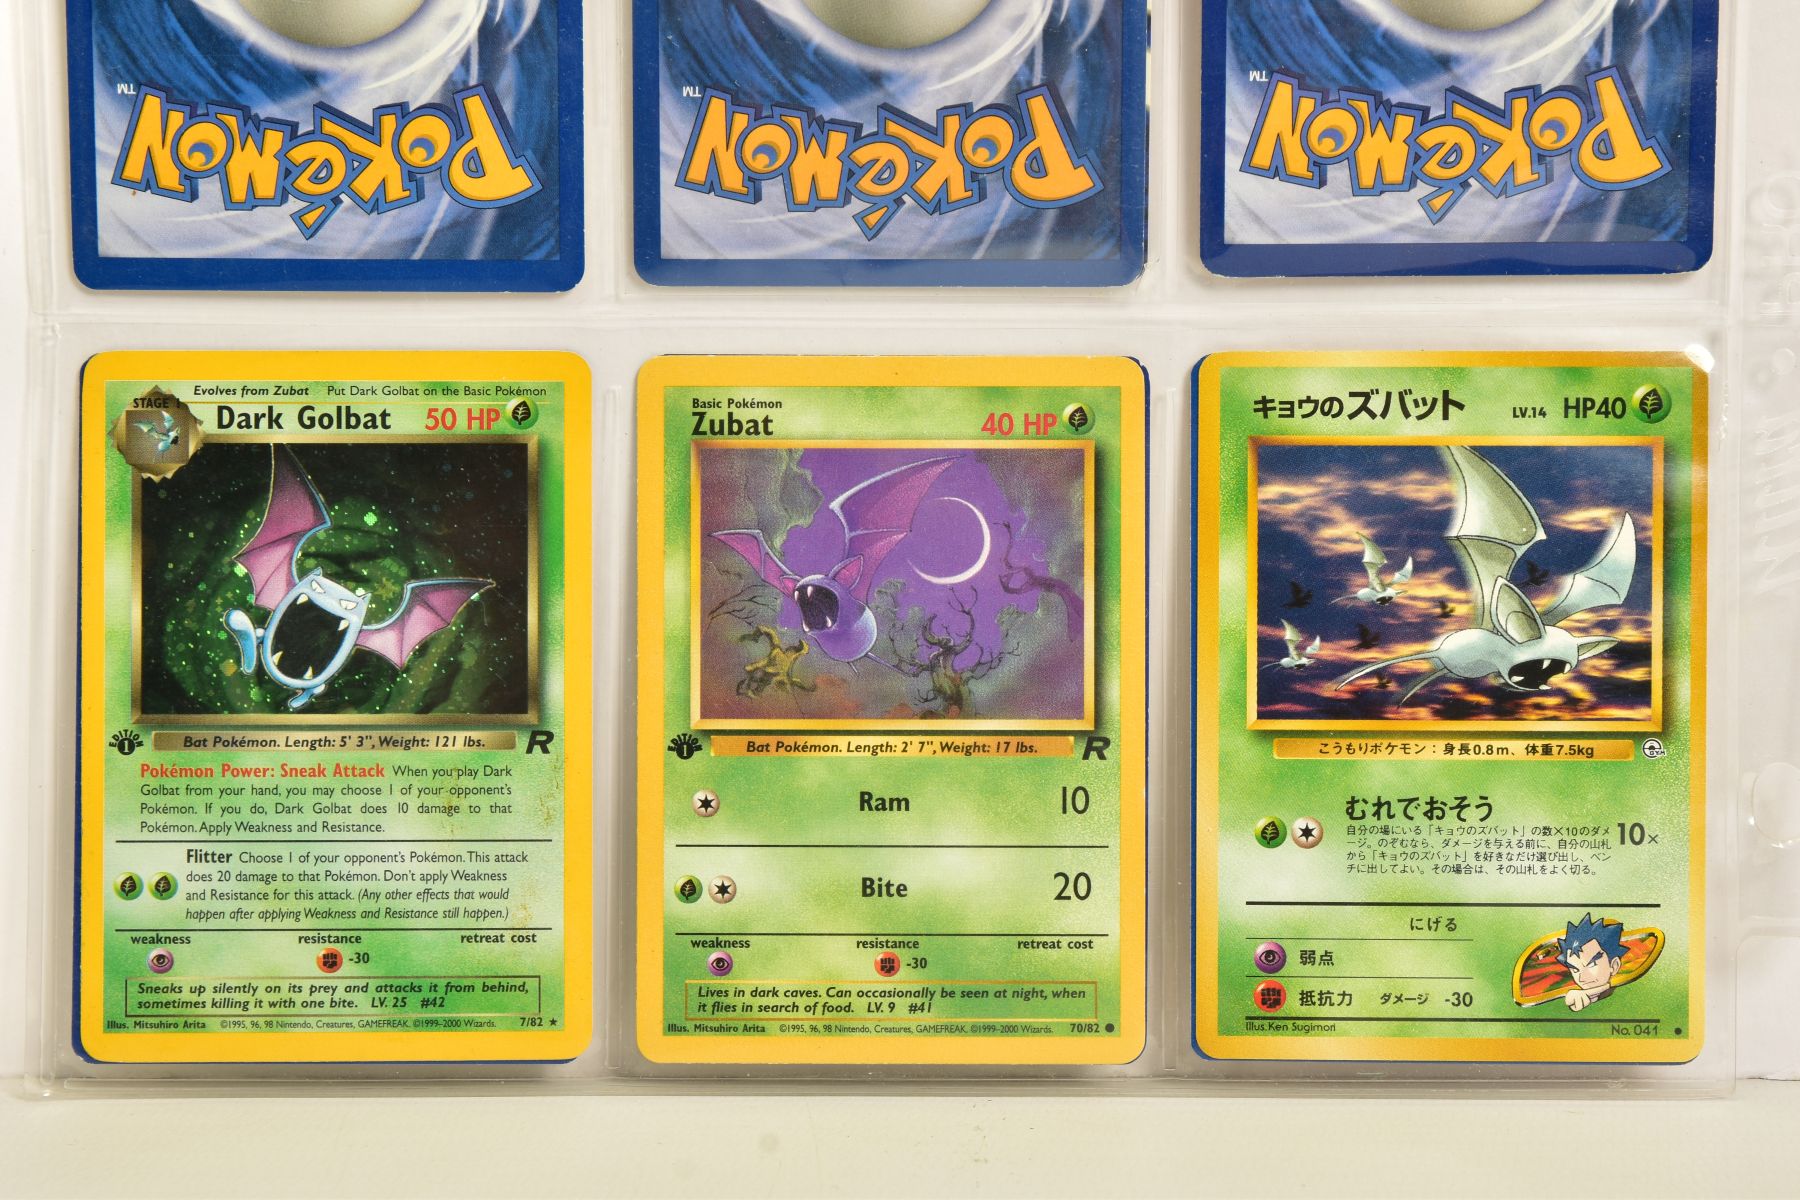 A QUANTITY OF POKEMON TCG CARDS, cards are assorted from Base Set, Base Set 2, Jungle, Fossil, - Image 11 of 46